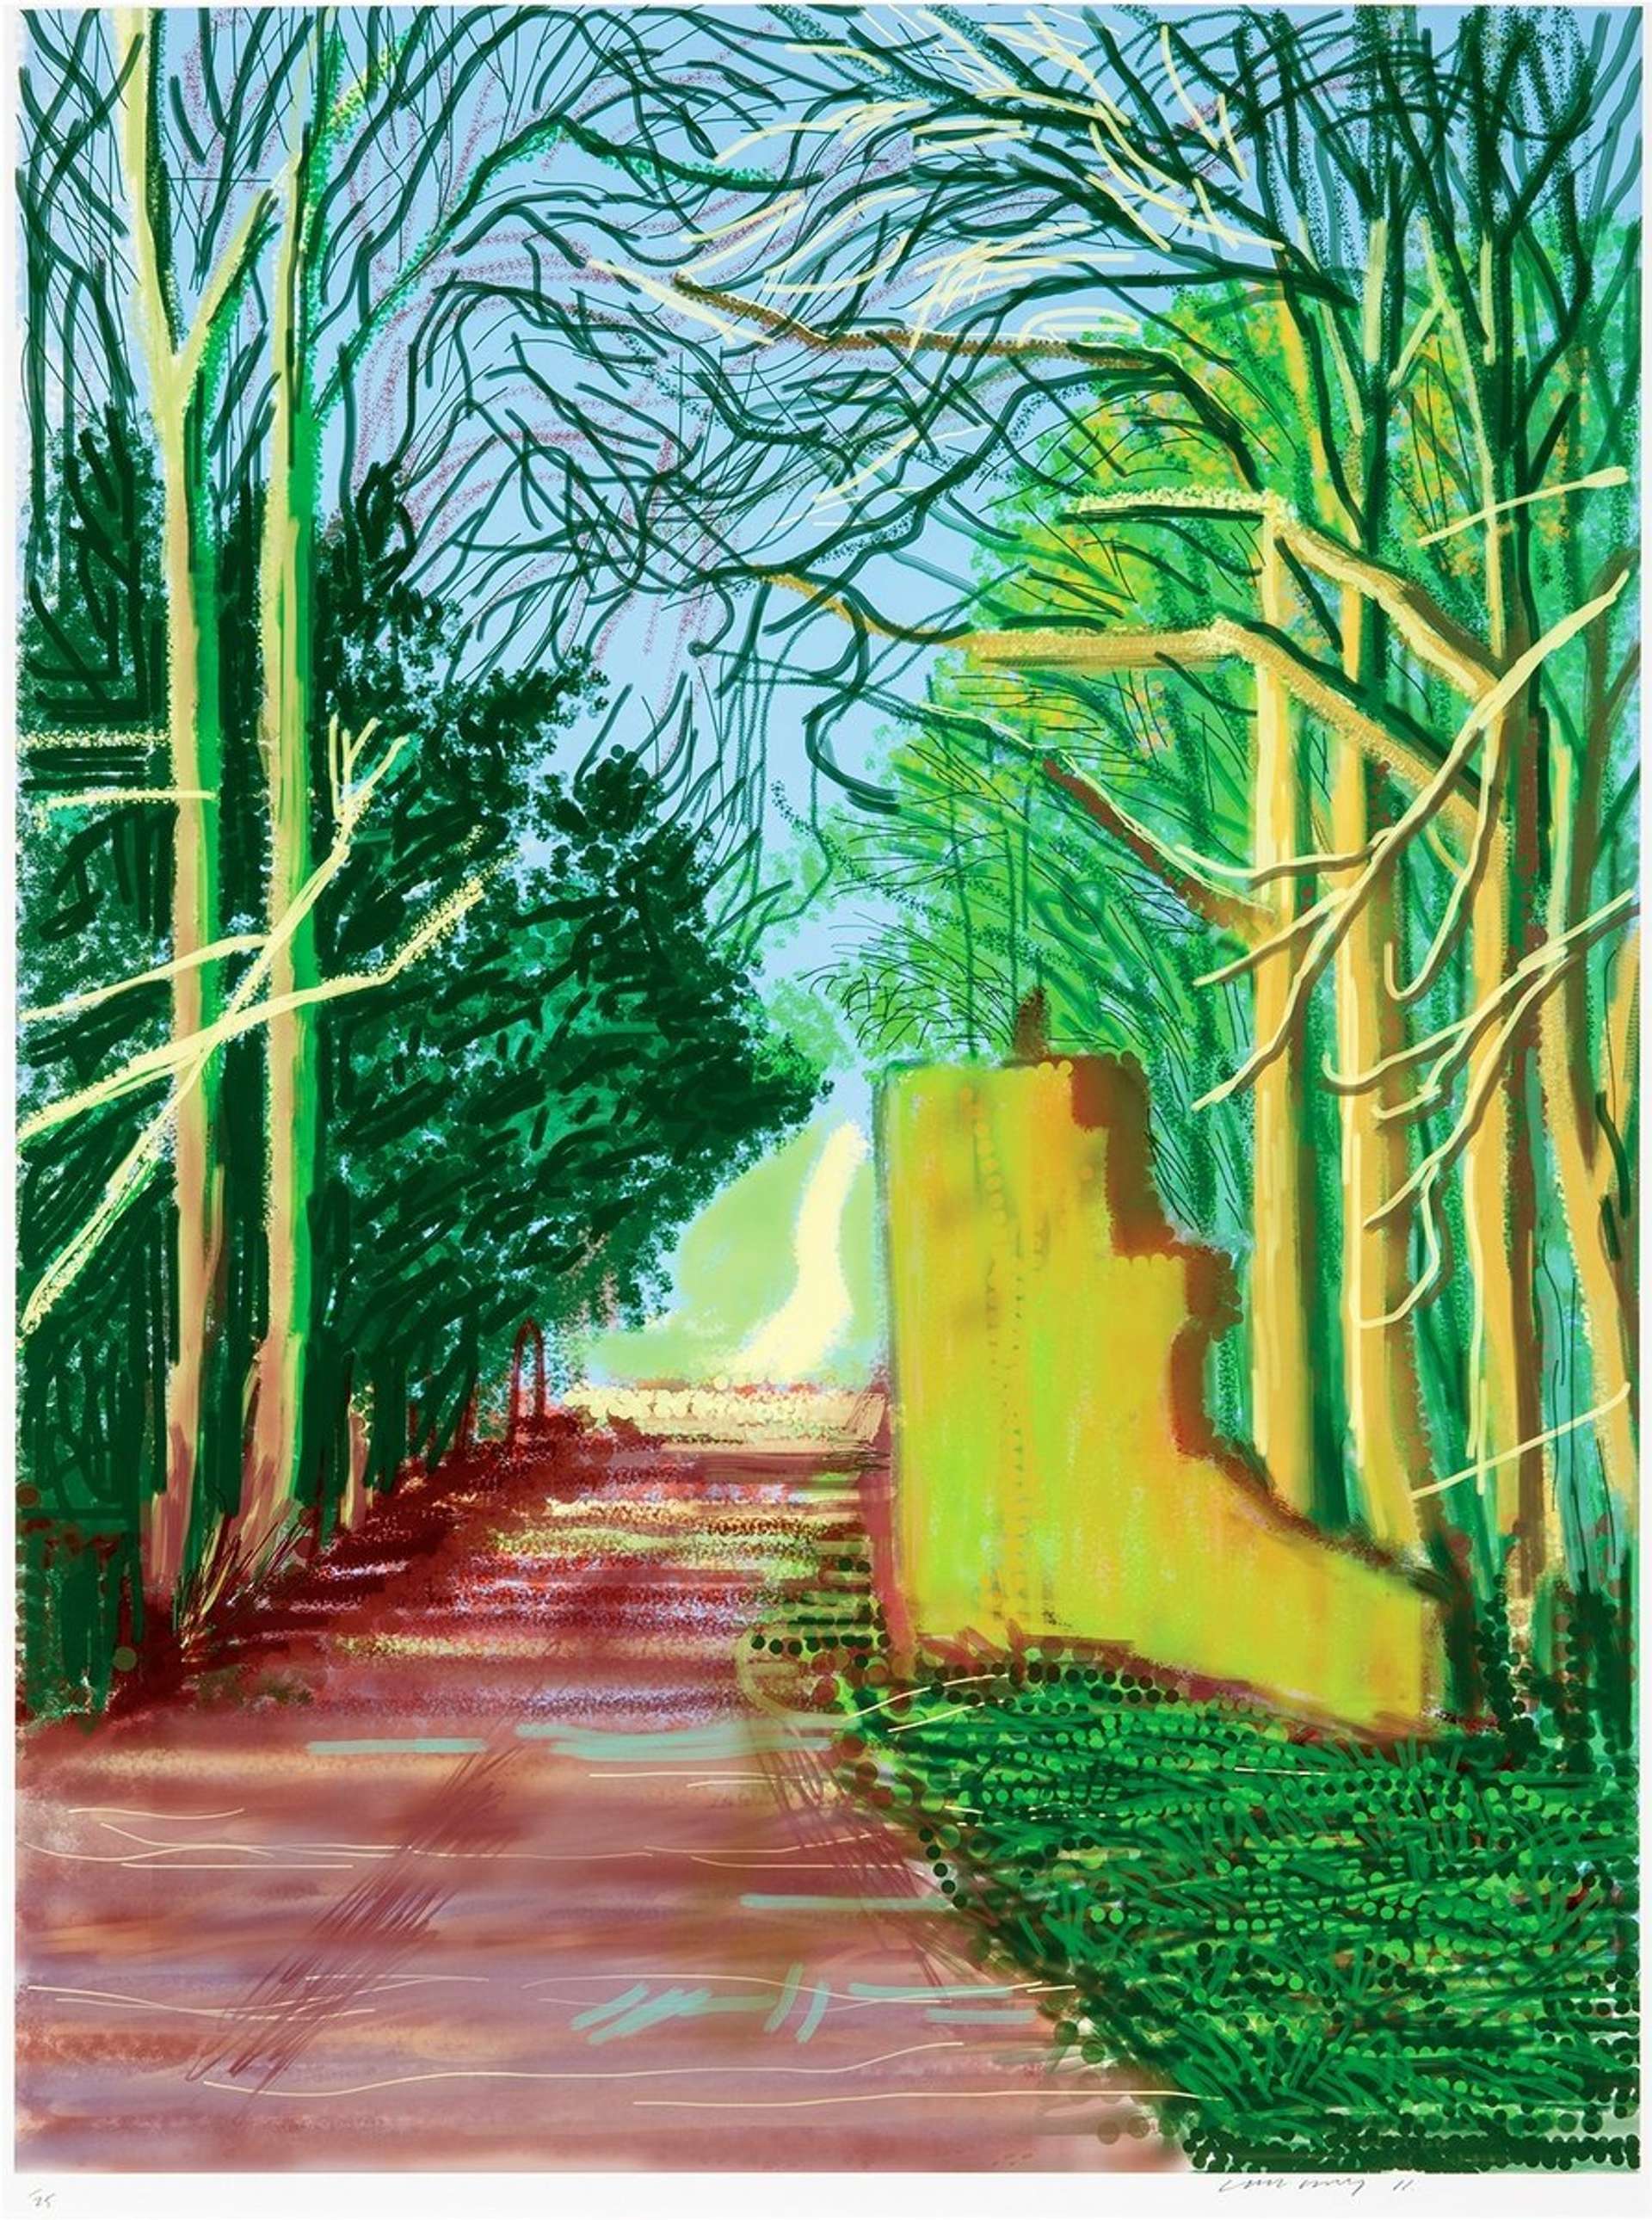 10 Facts About David Hockney's Arrival of Spring in 2011